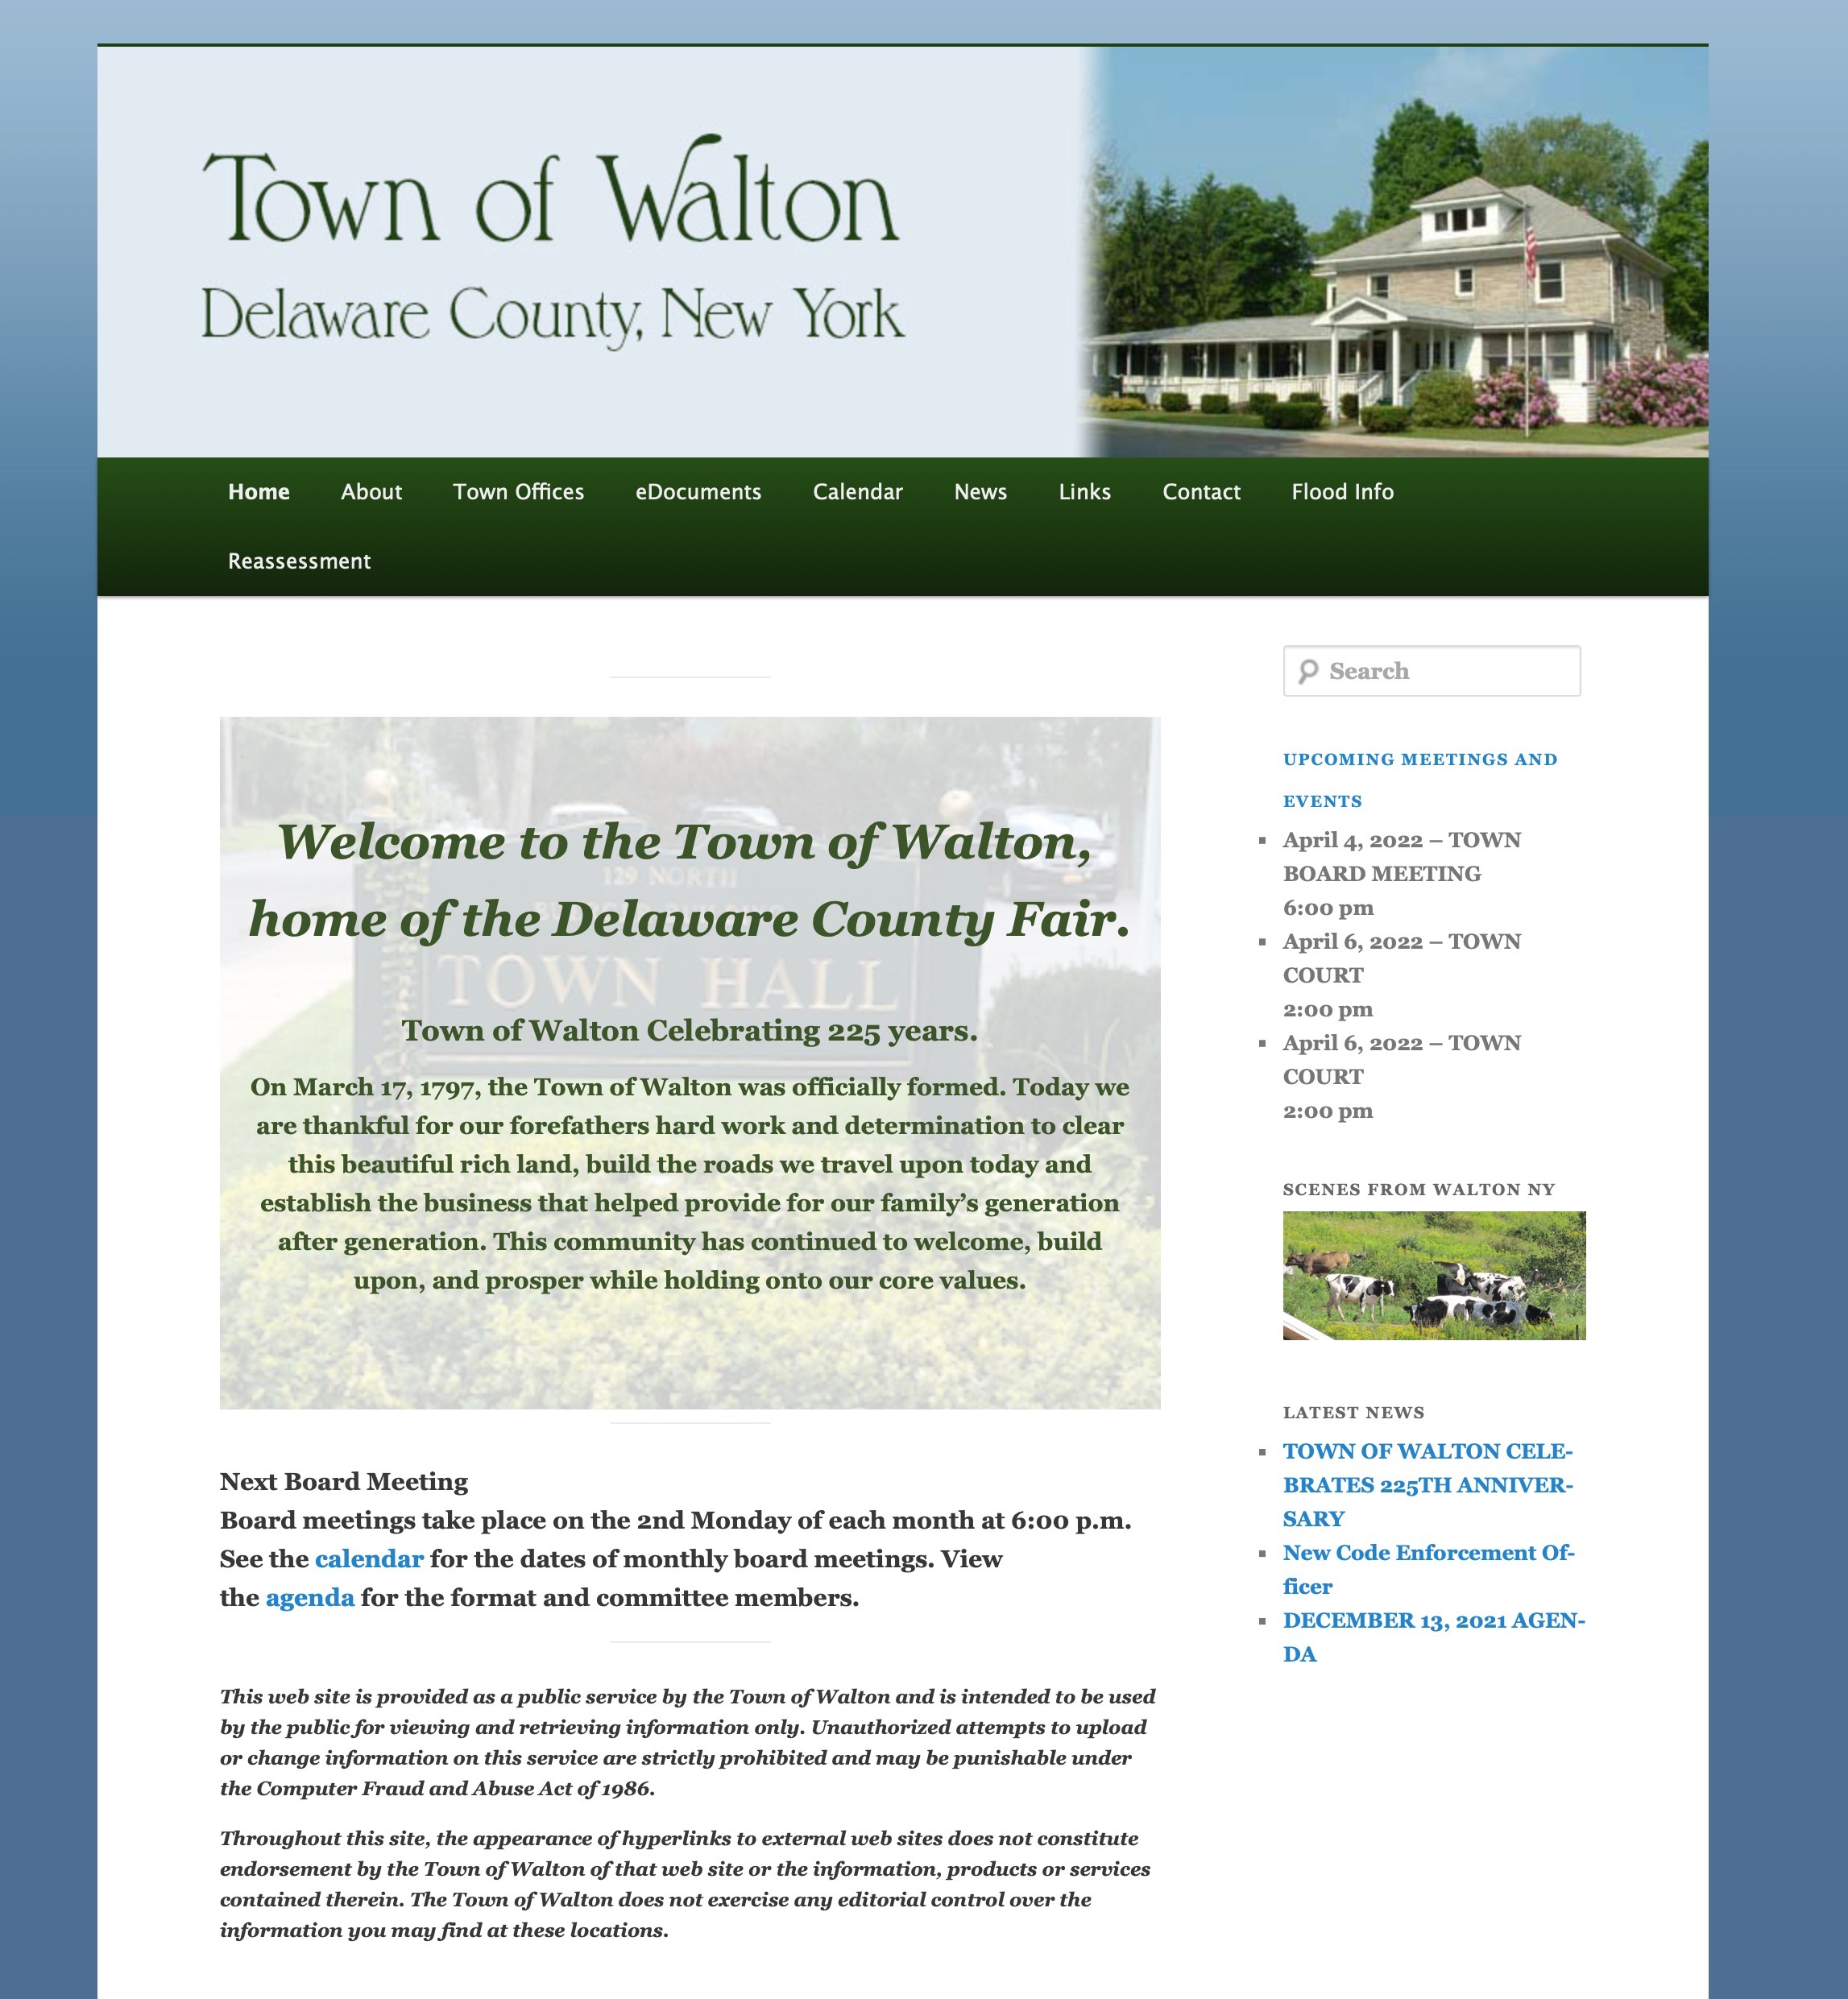 A website for the Town of Walton NY.
Visit website townofwalton.org